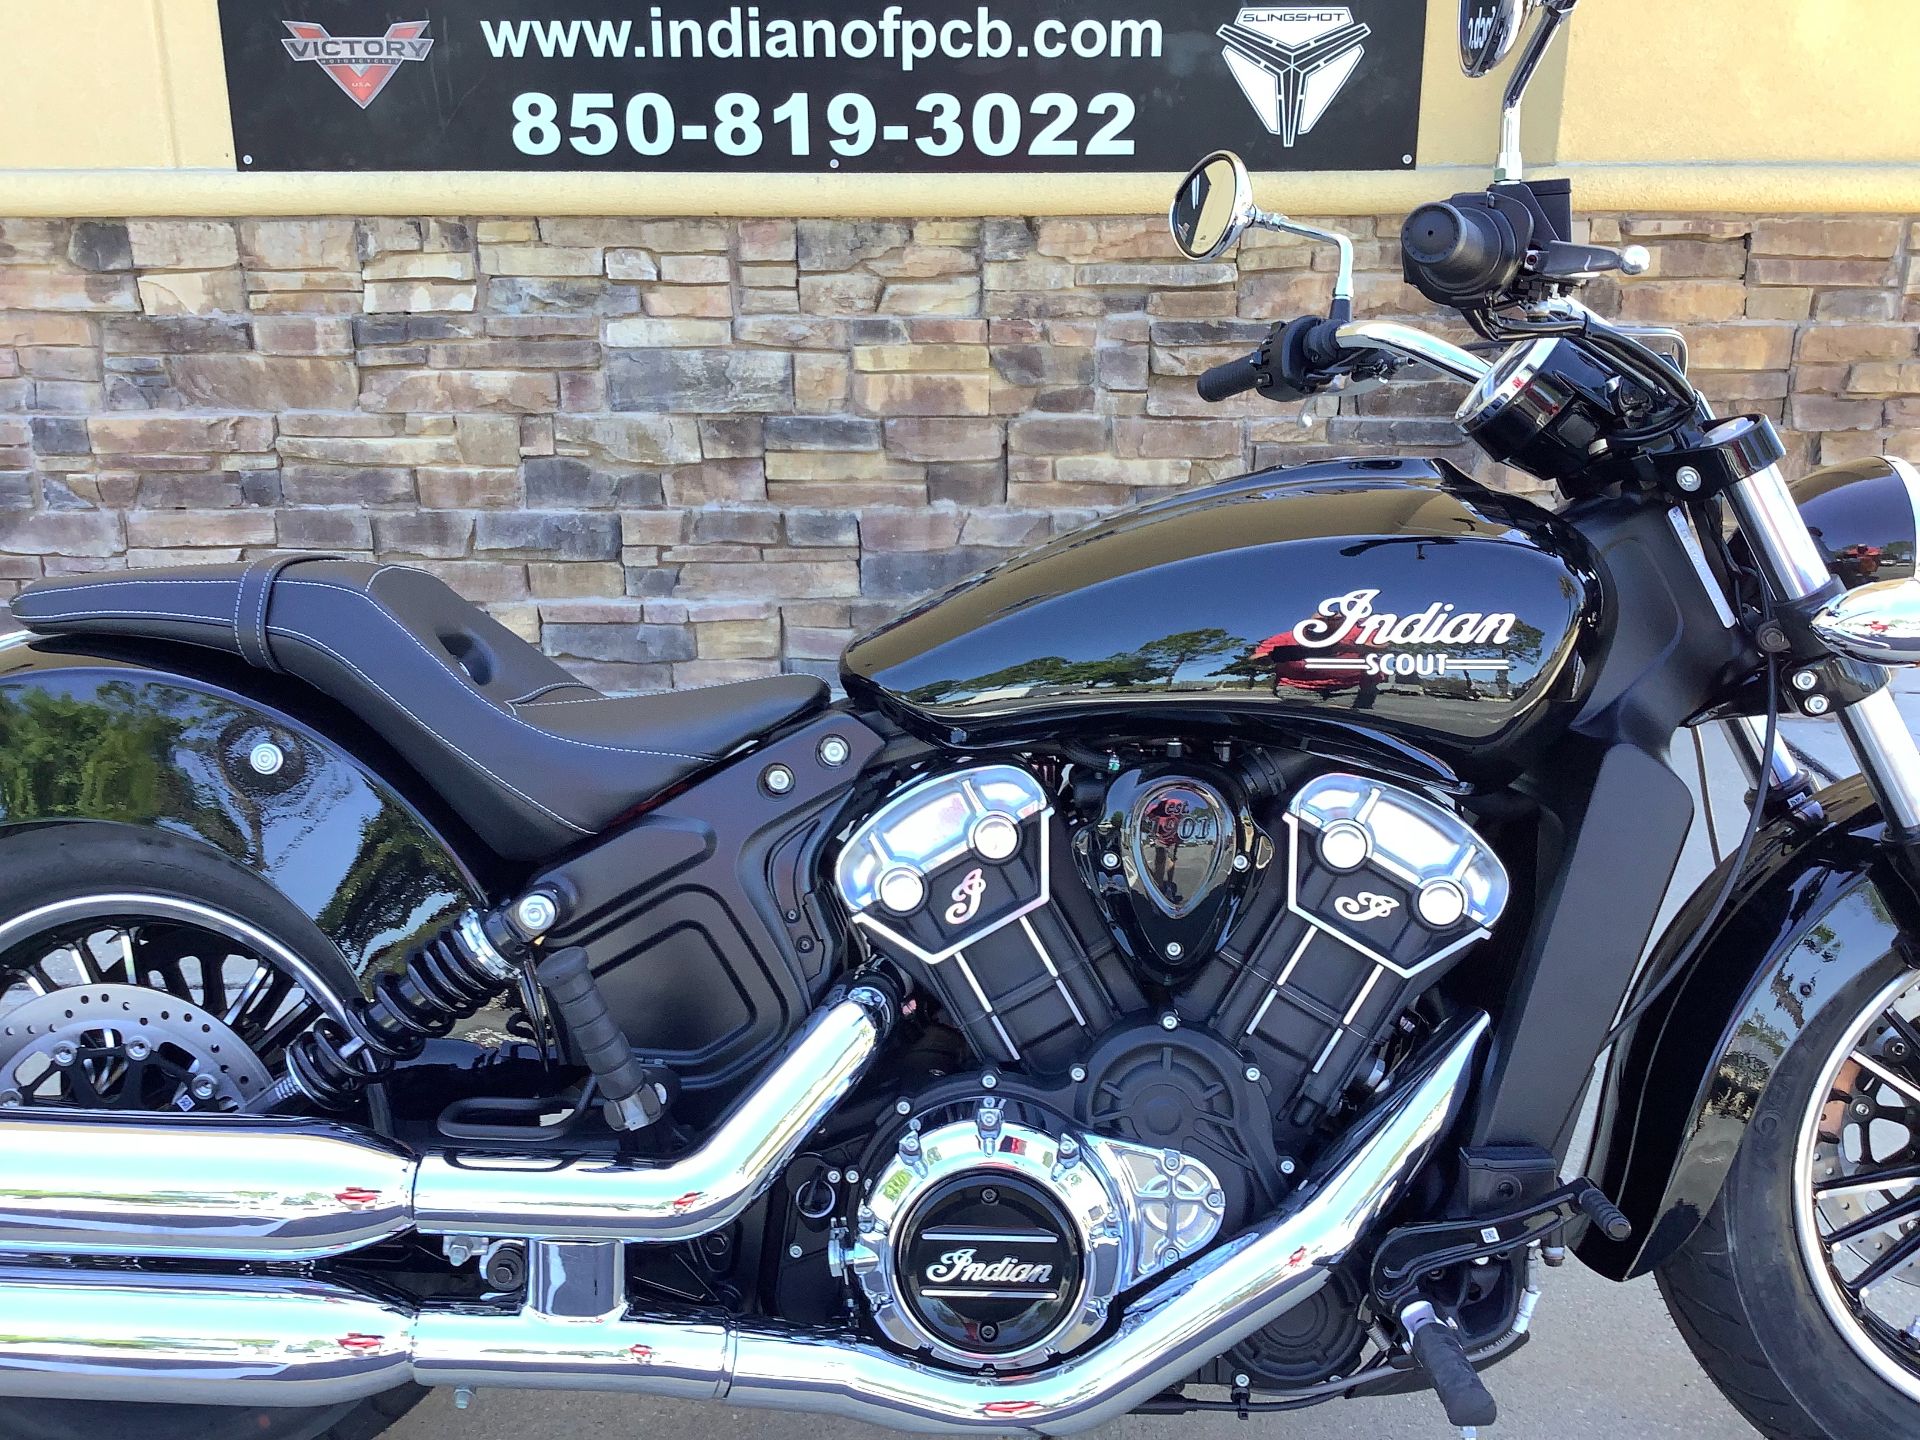 2022 Indian SCOUT NON ABS in Panama City Beach, Florida - Photo 4